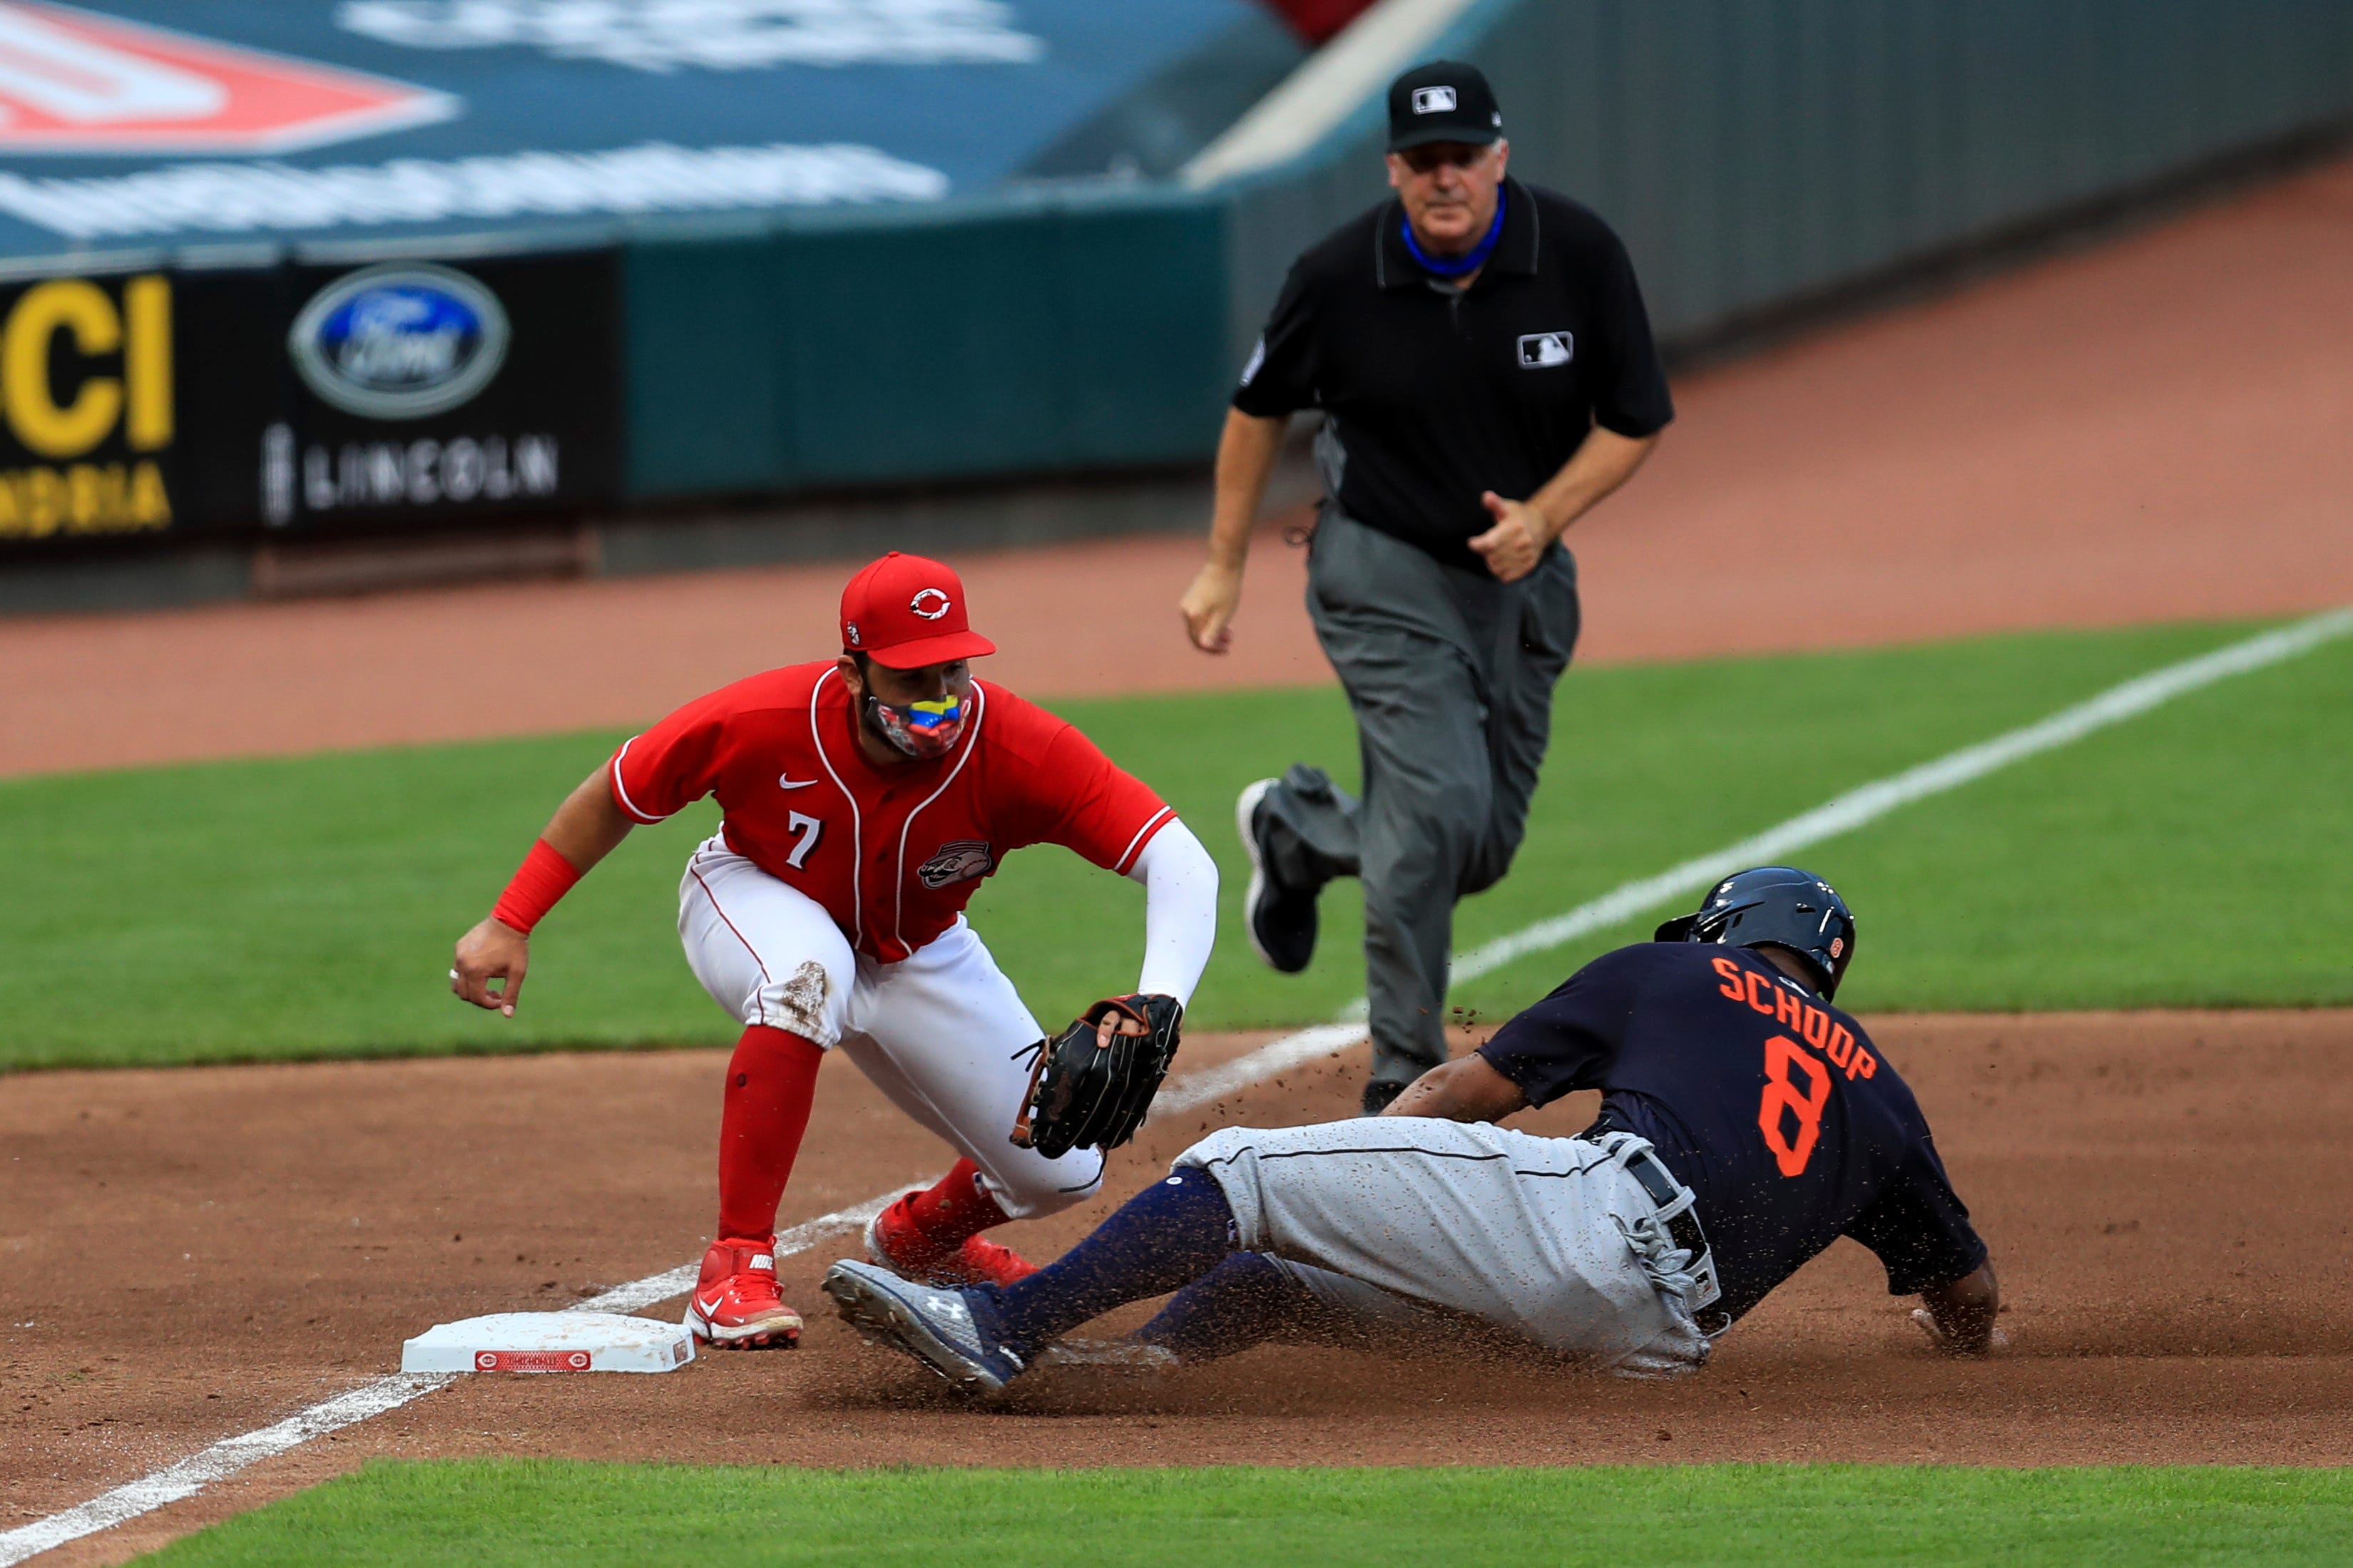 Cincinnati Reds third baseman Eugenio Suarez (7) tags out Detroit Tigers' Jonathan Schoop (8) during the fourth inning of an exhibition baseball game against the Detroit Tigers at Great American Ballpark in Cincinnati, on Tuesday, July 21, 2020.